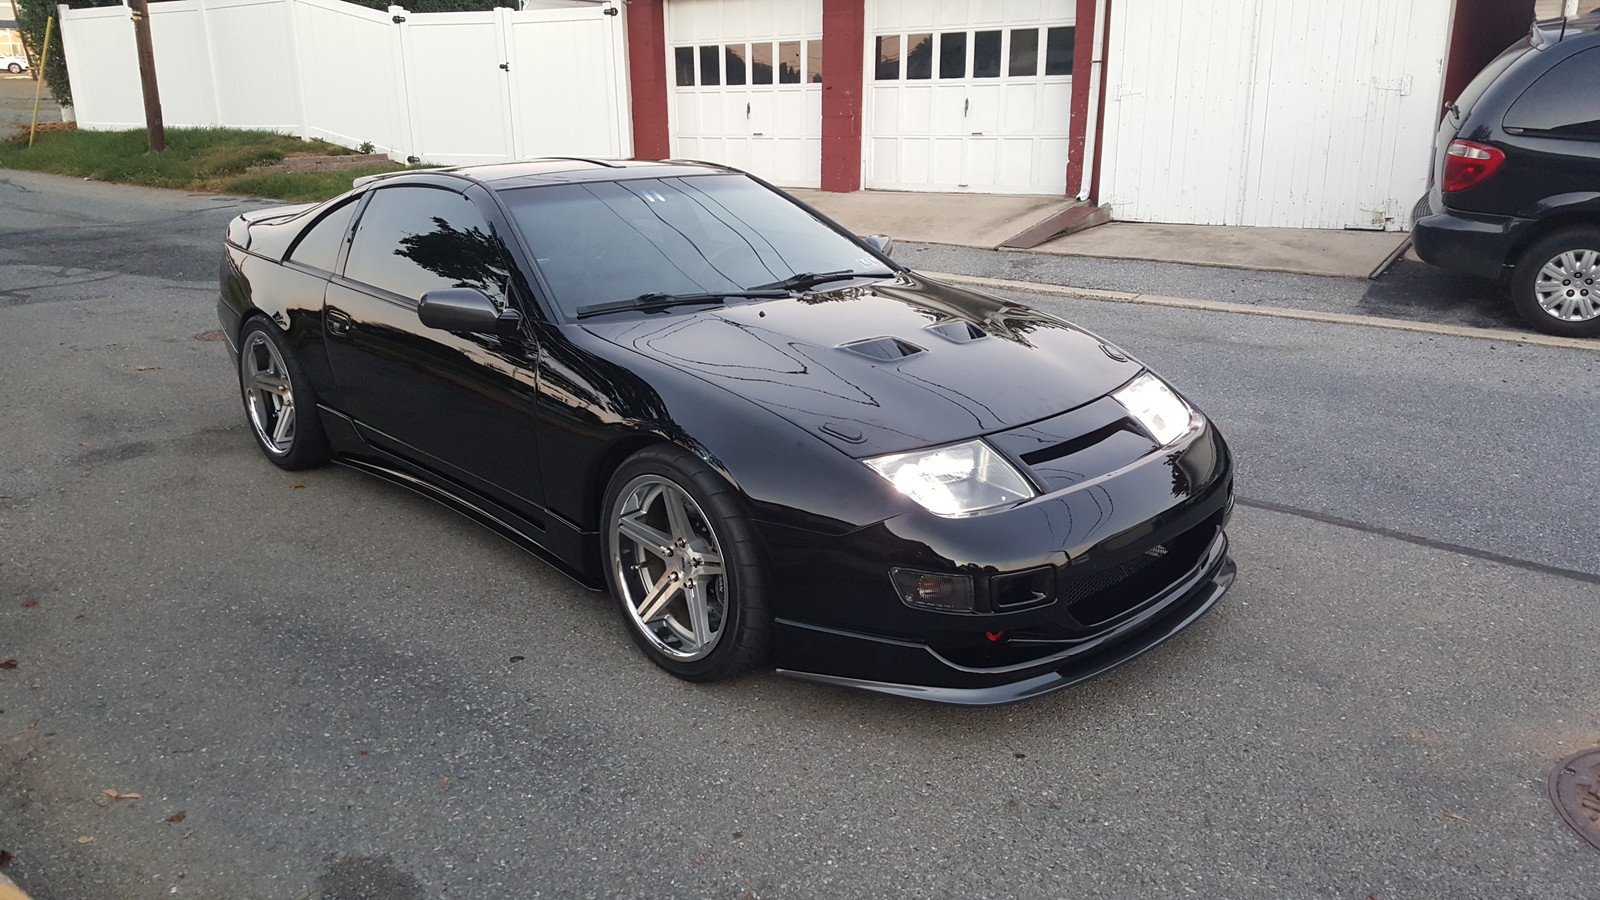 Black 1990 Nissan 300ZX 6.0 LS swapped